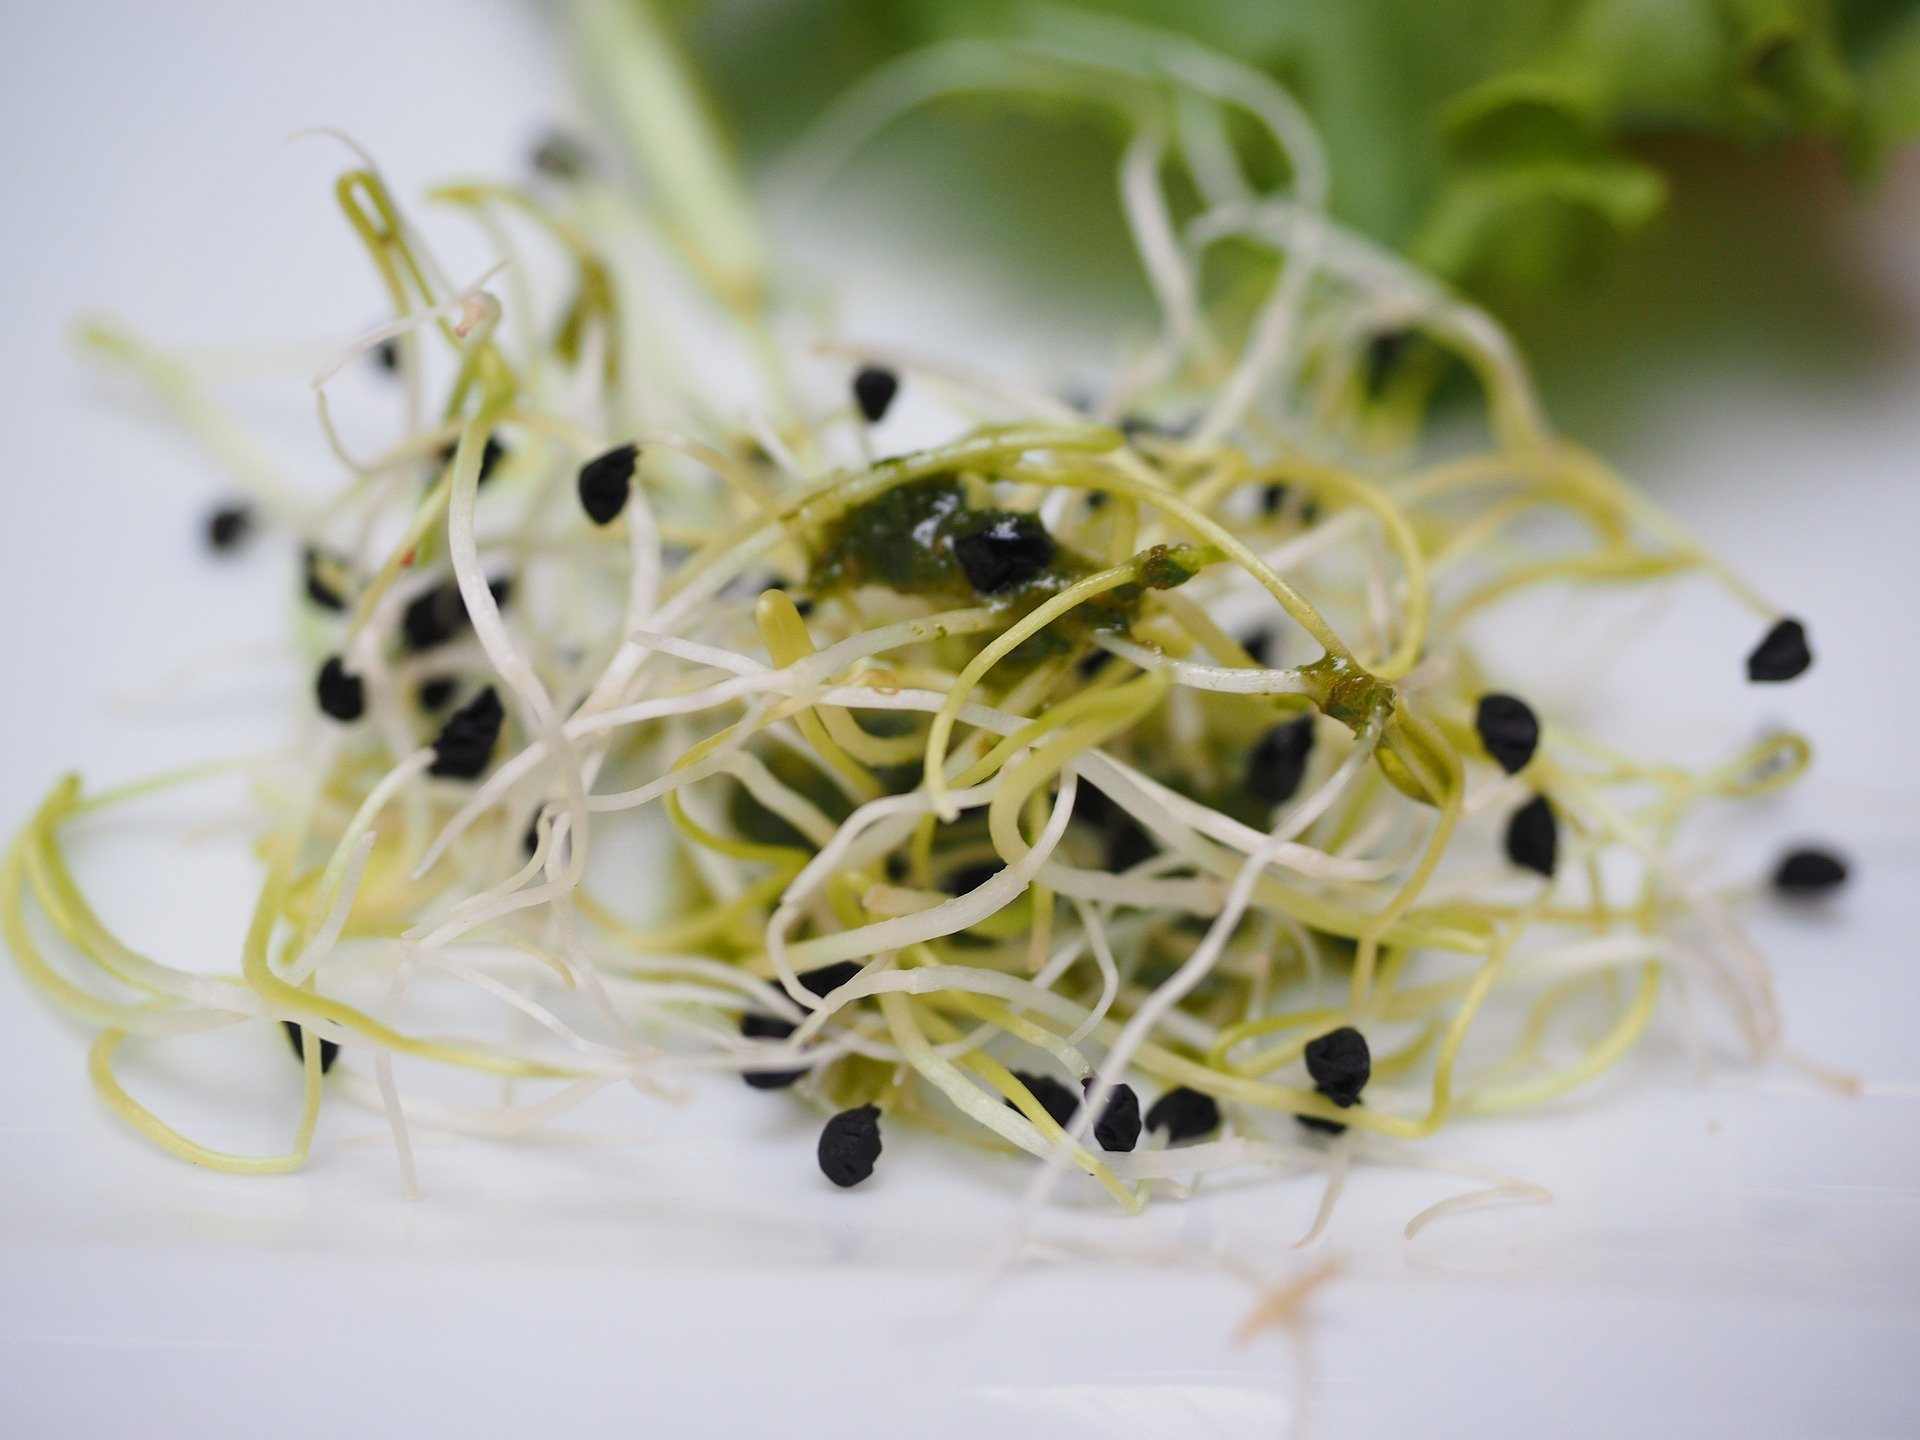  Nebraska reports cluster of salmonella infections linked to alfalfa sprouts 